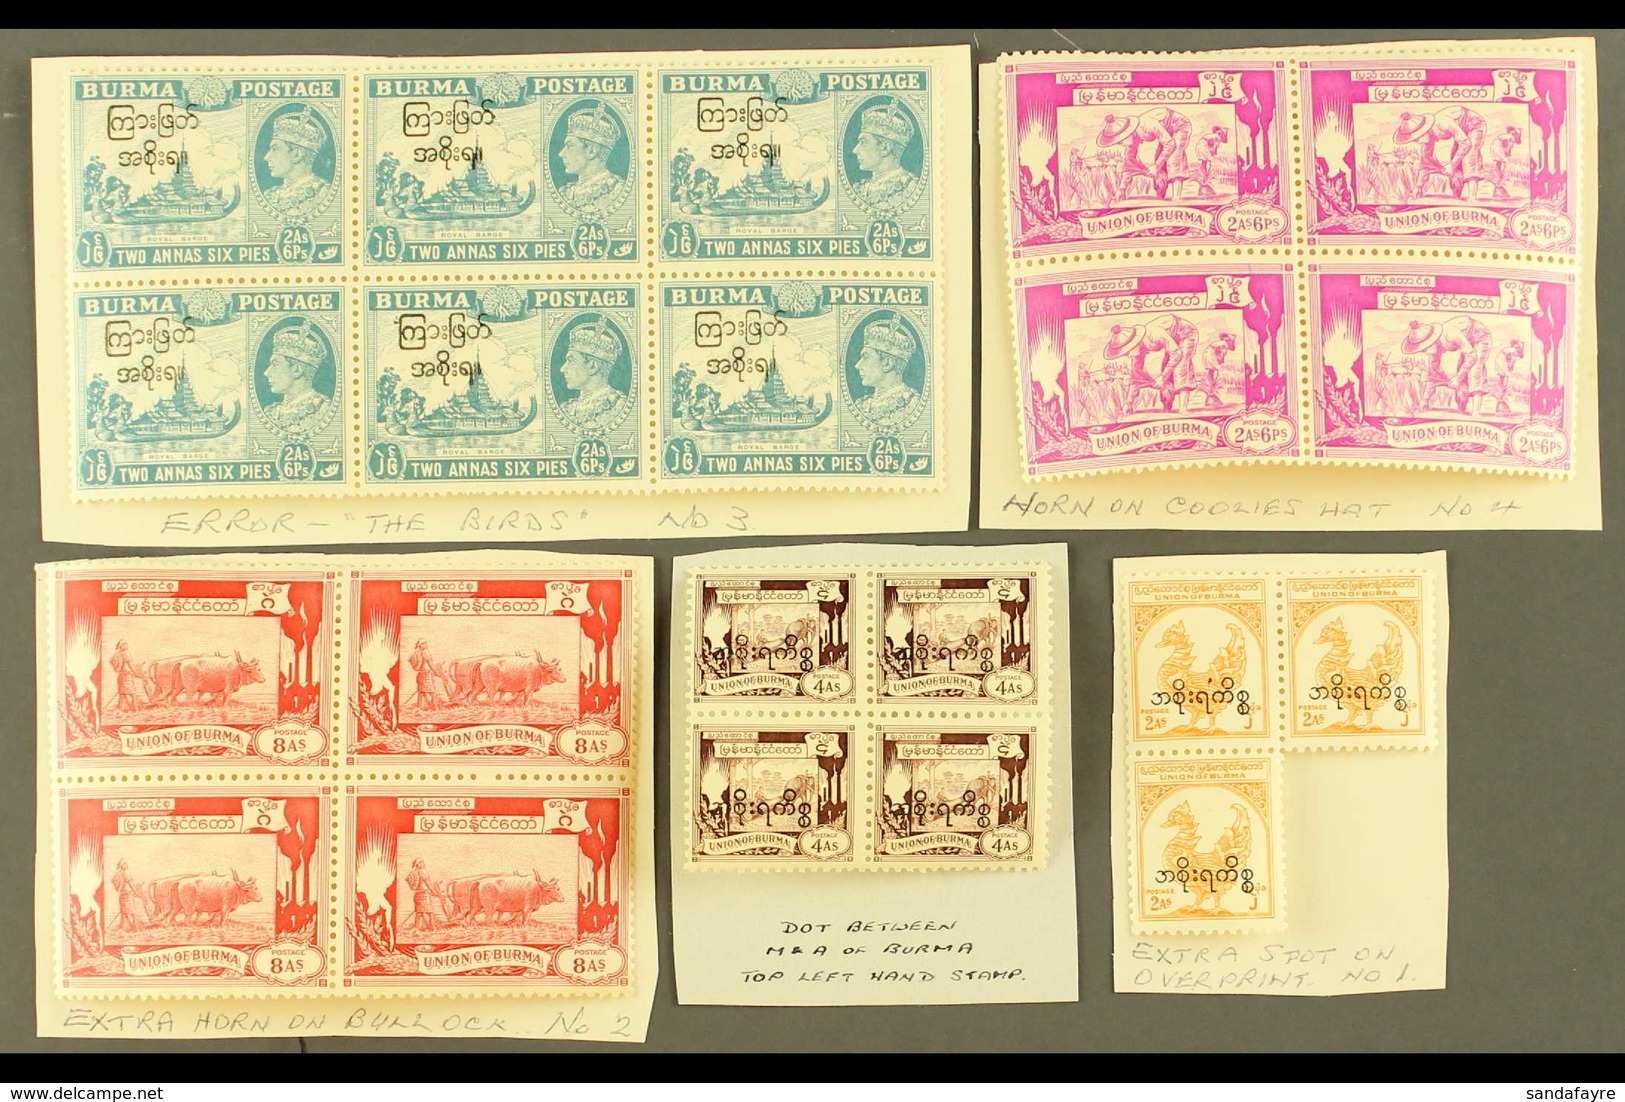 PLATE FLAWS AND VARIETIES Selection Of 1947 - 1951 Interim Govt Overprints And Independence Issues In Blocks Or Multiple - Burma (...-1947)